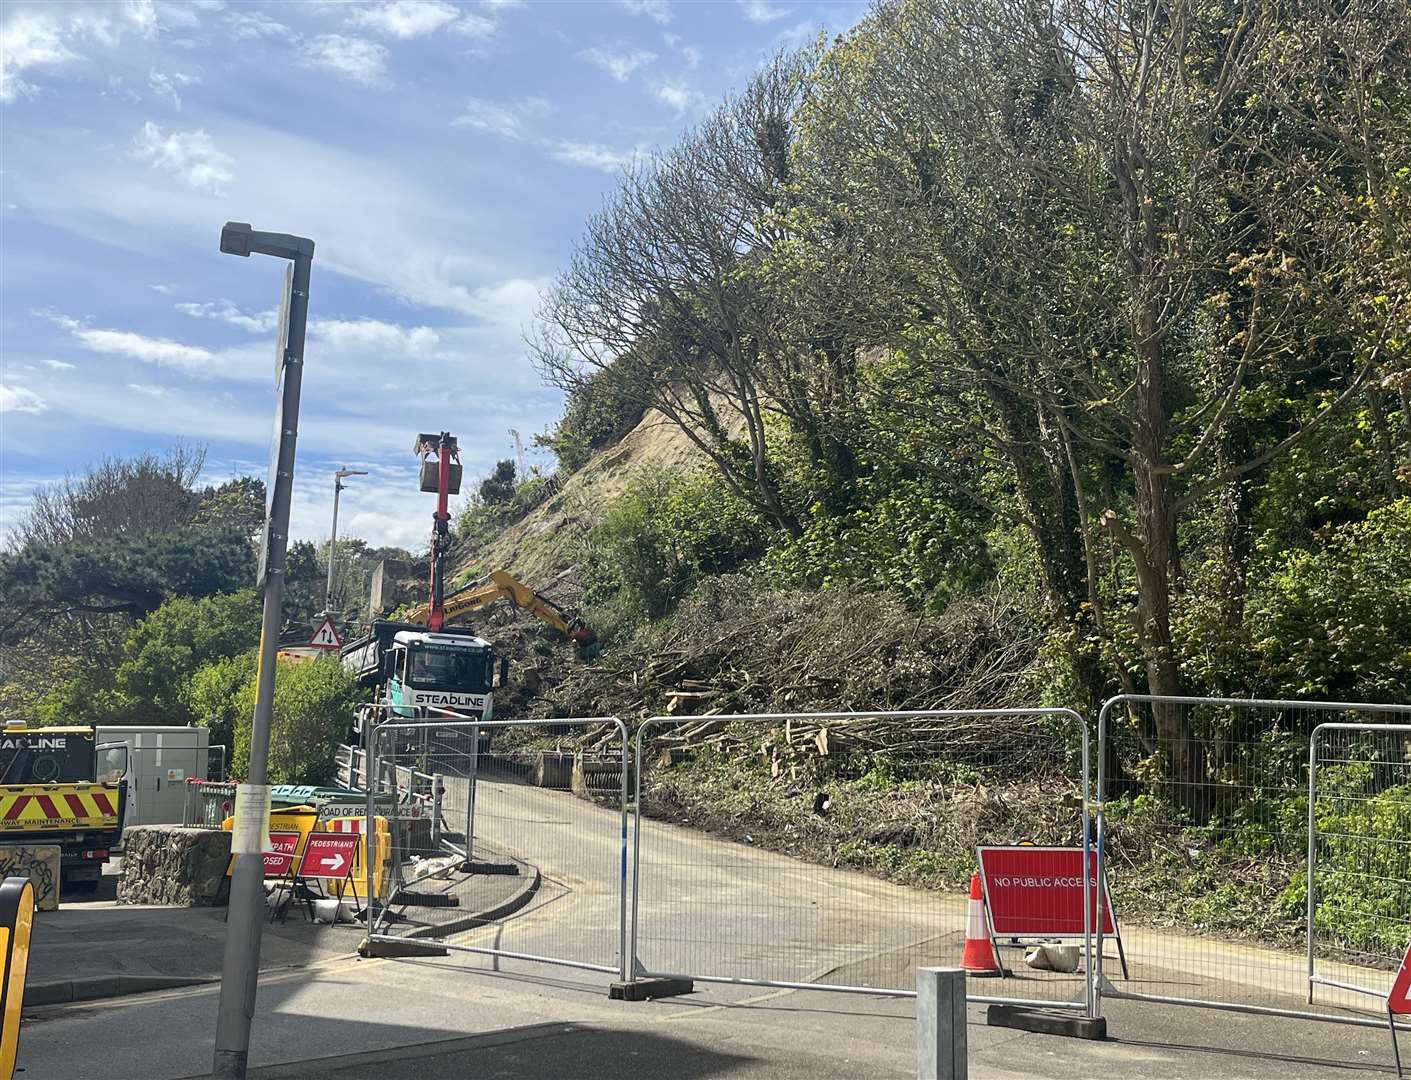 Further along the seafront, the Road of Remembrance remains closed following landslides earlier in the year